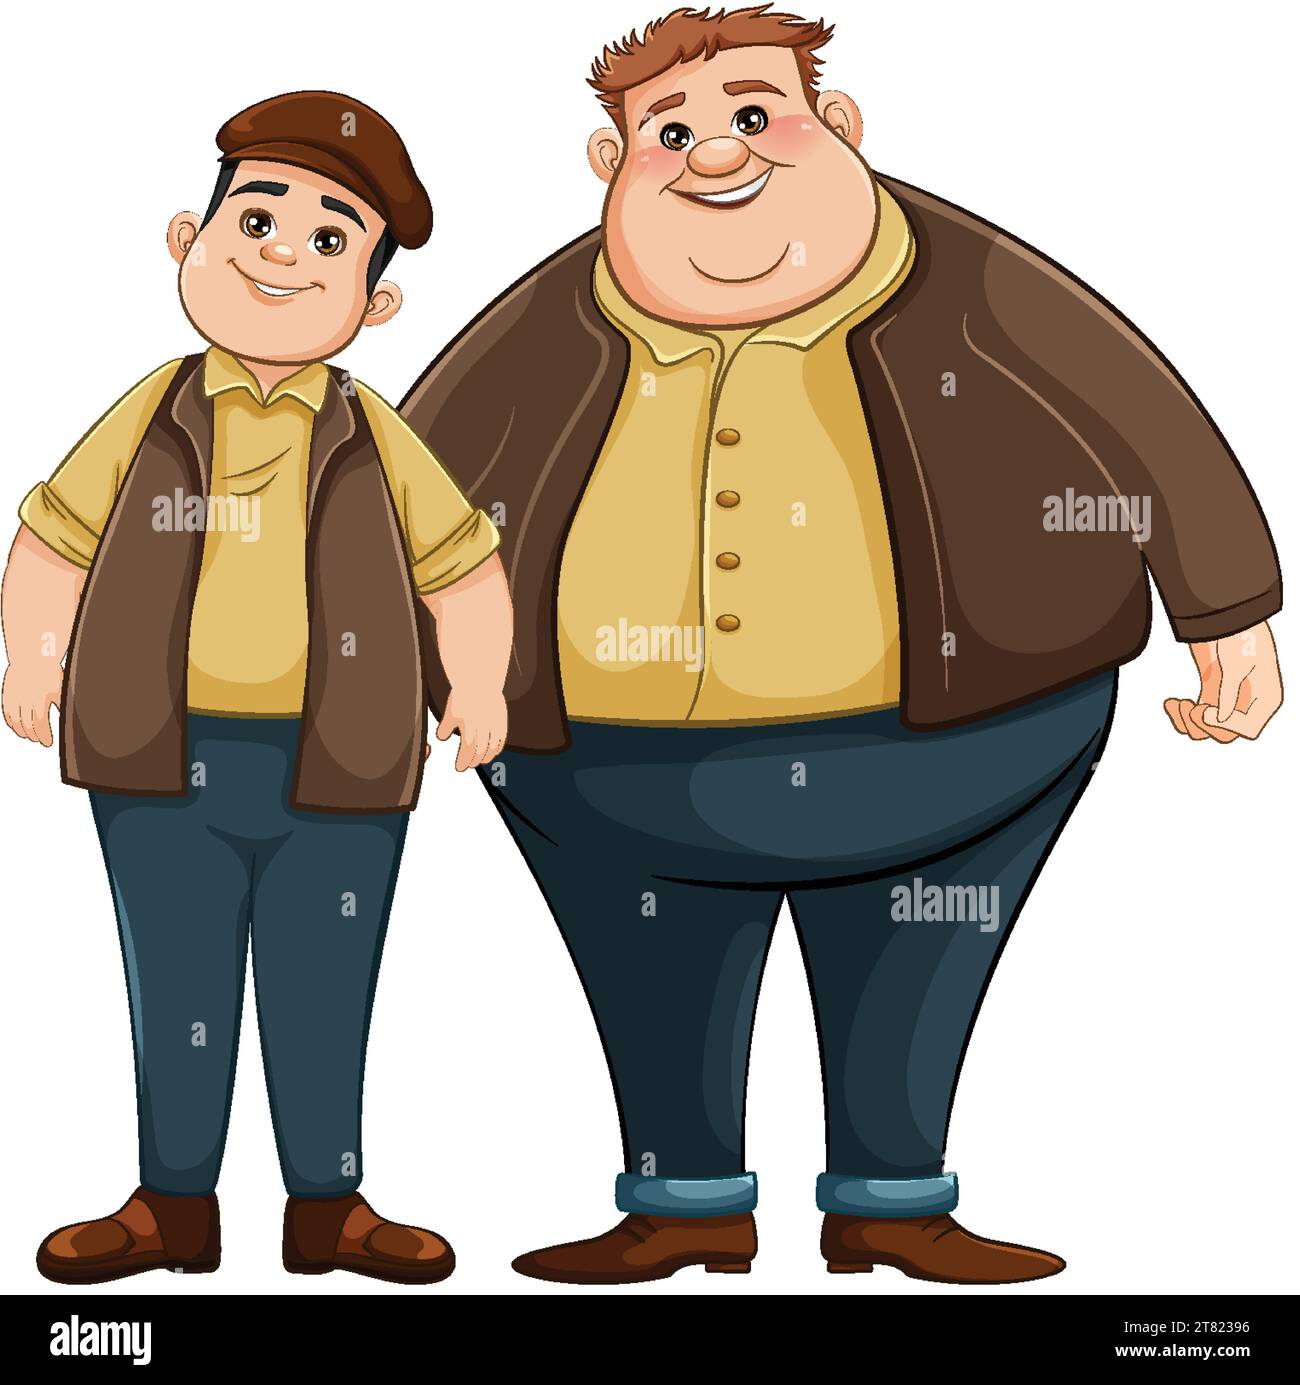 Two cartoon twin brothers with chubby faces and big smiles Stock Vector